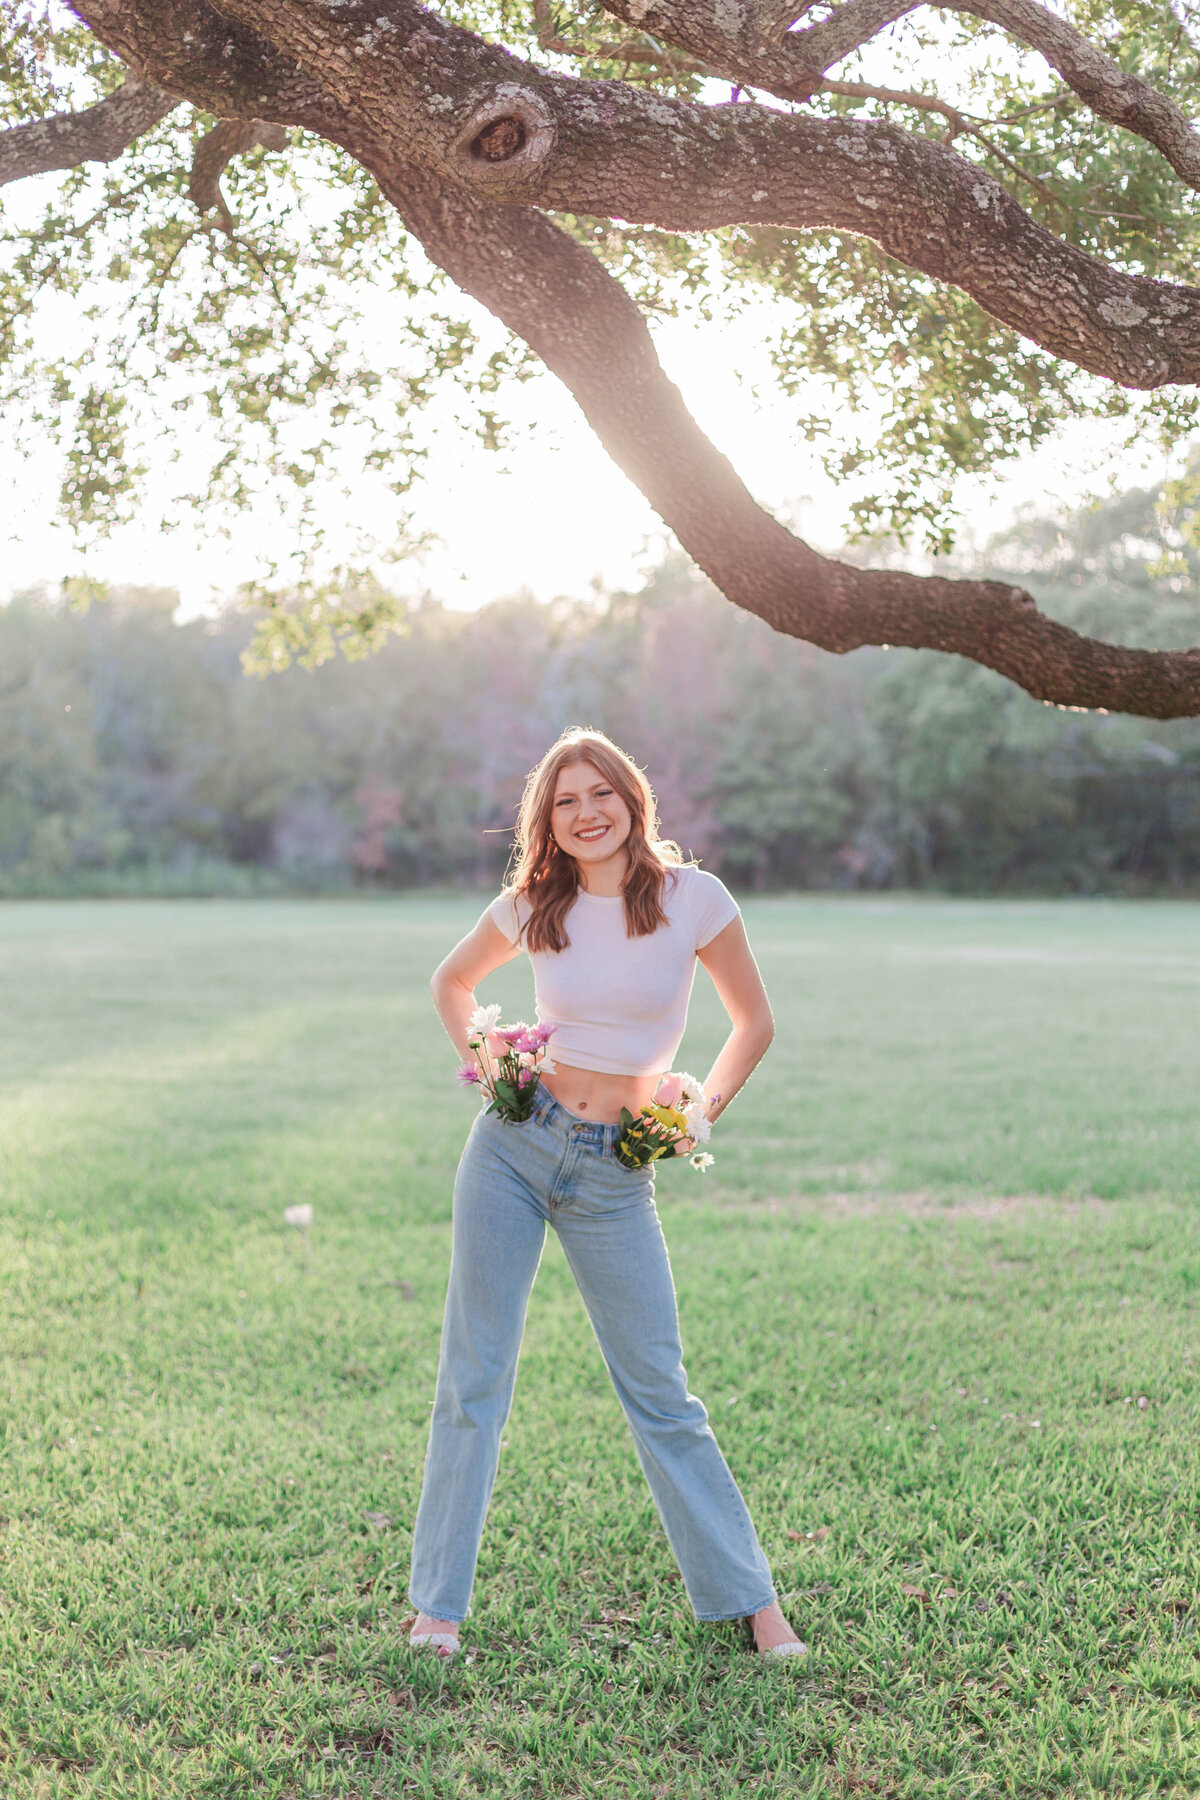 A senior girl stands with her hands on her hips wearing a white shirt and jeans with flowers coming out of her pockets in a field in League City Texas